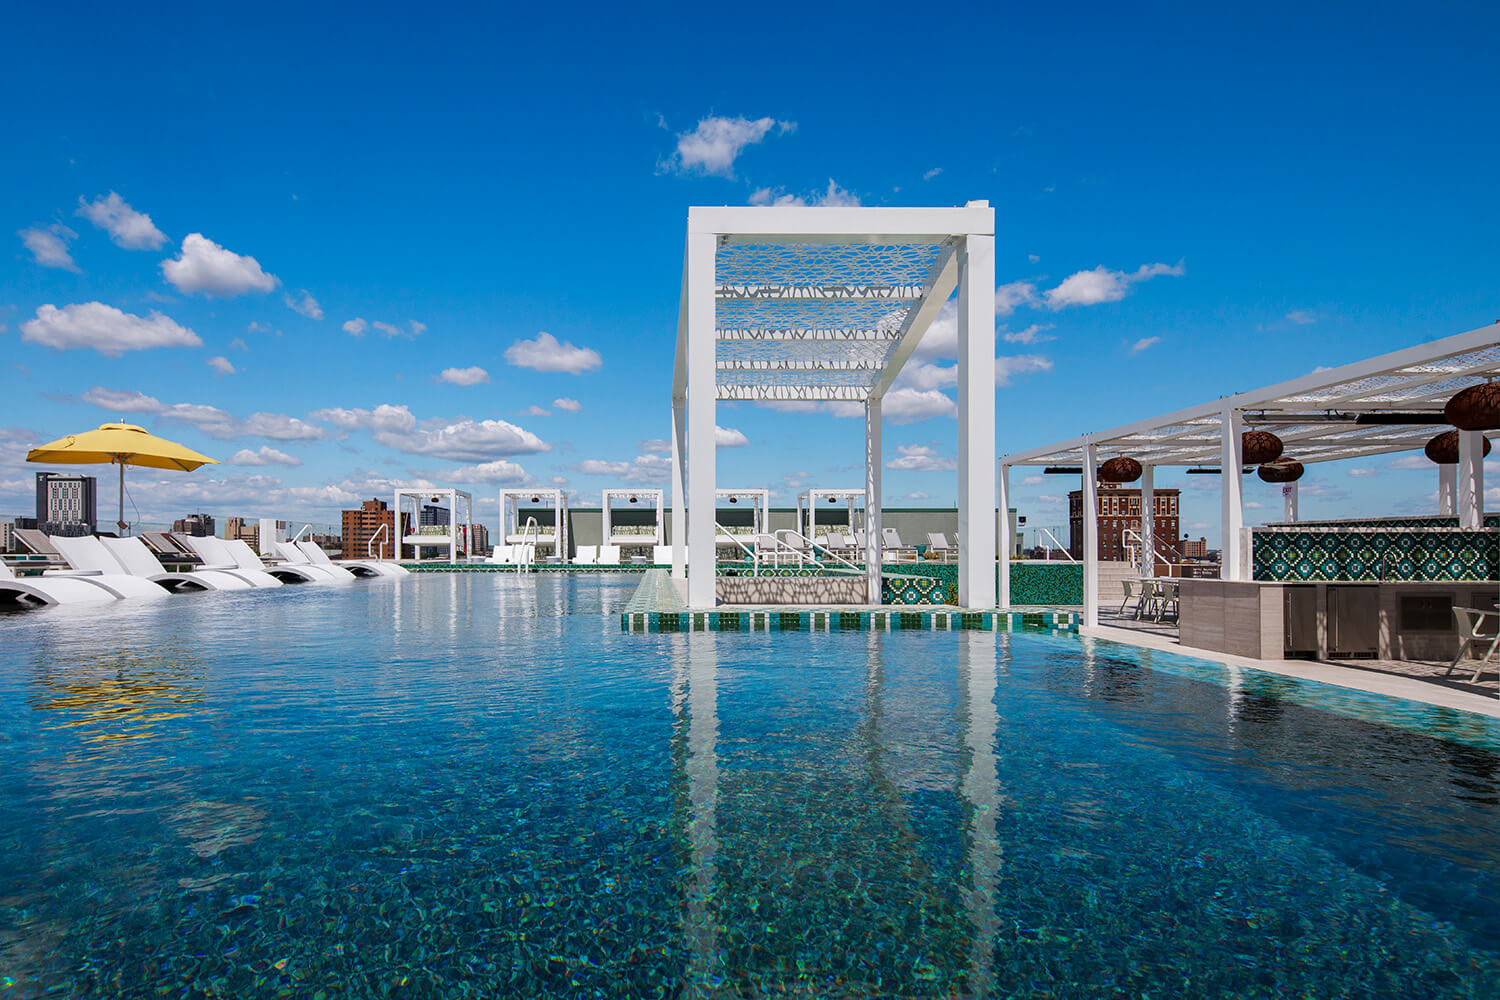 Infinity pool with private cabanas